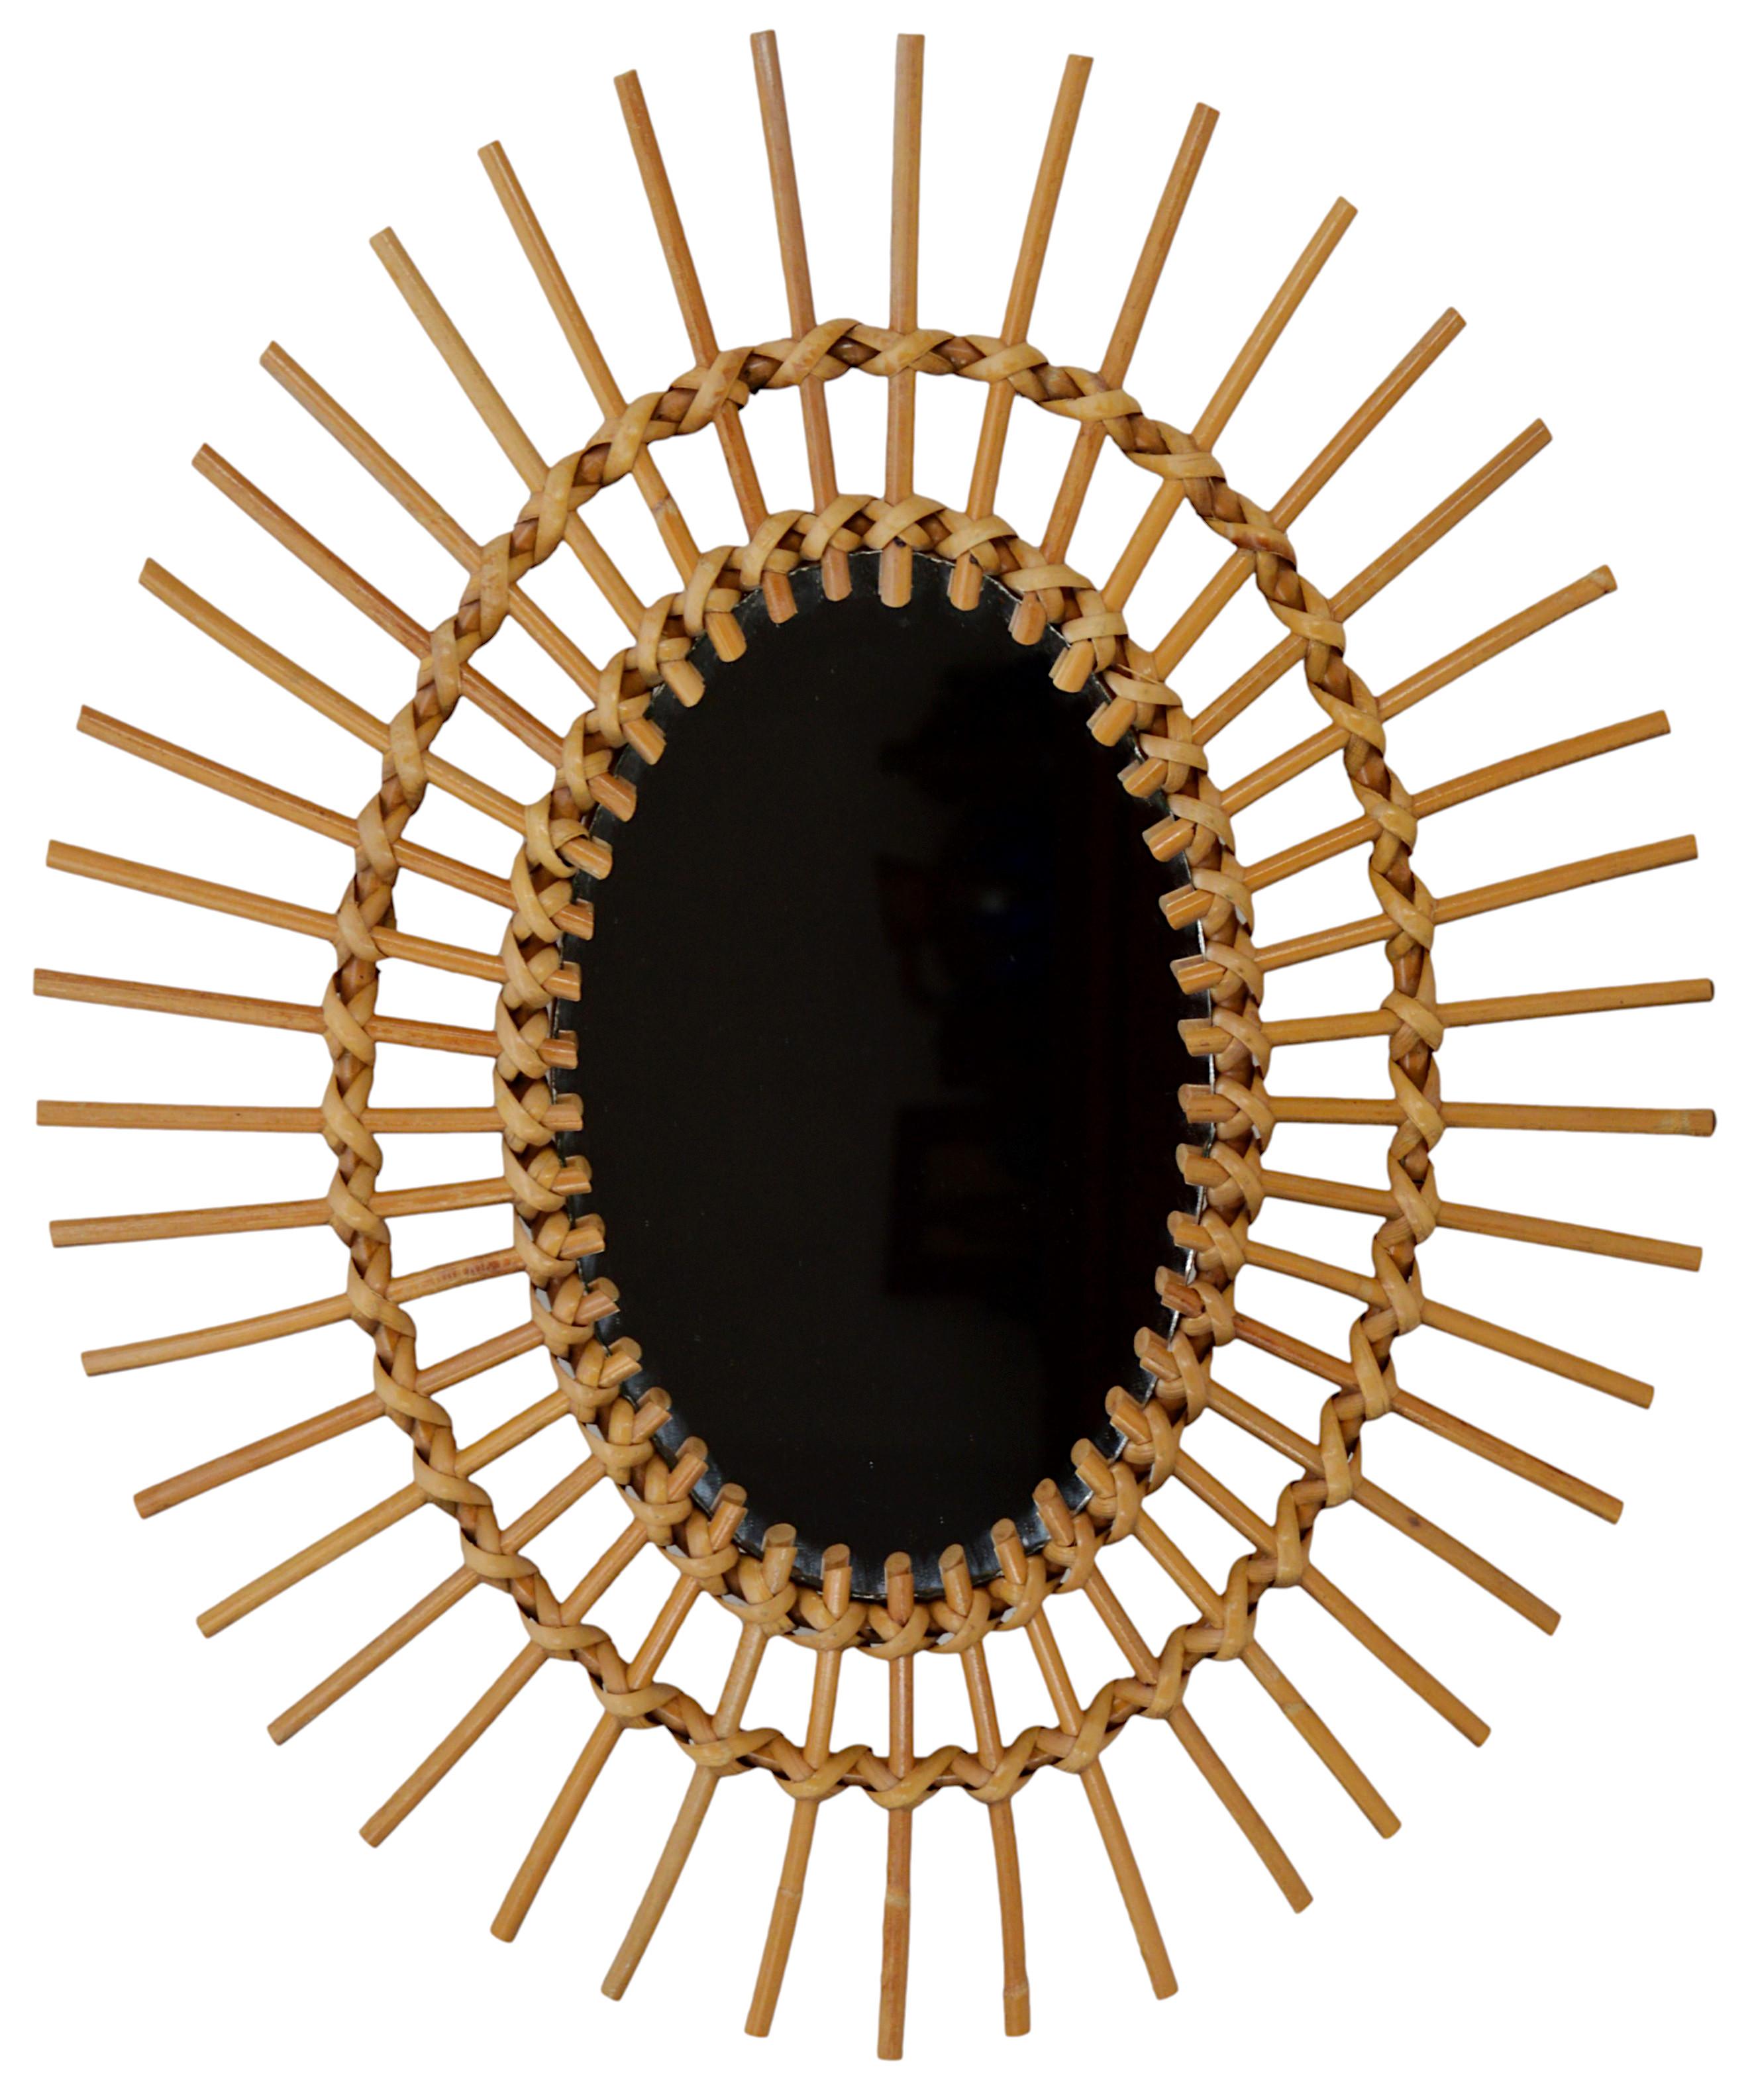 French mid-century wall mirror, France. Genuine from the 1950s. Bamboo and rattan mirror with radiating decoration. Original mirror in very good condition. Measures: Height: 22.8